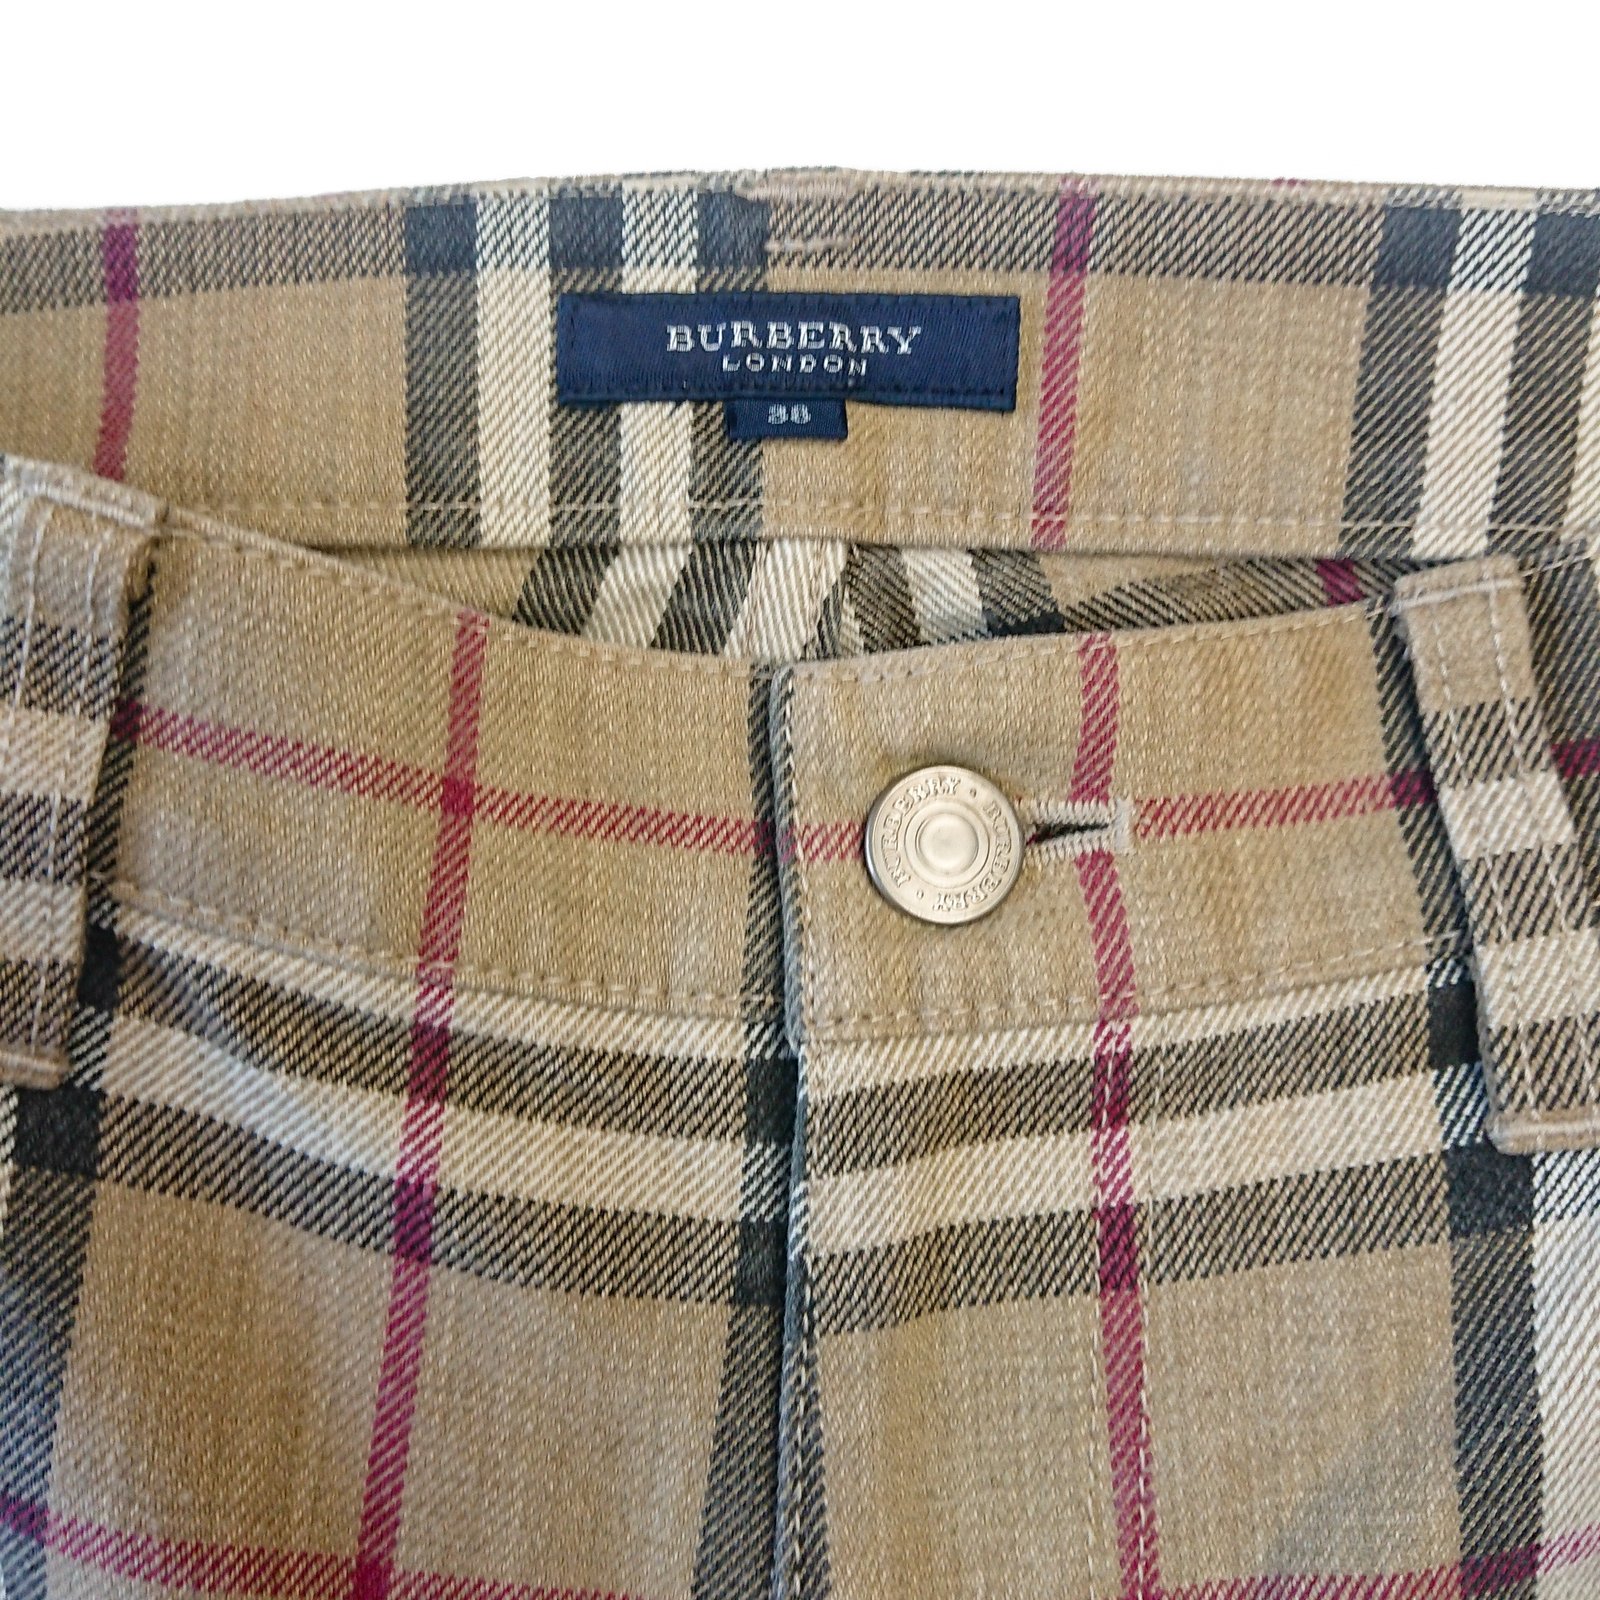 Vintage Burberry's Made in USA 100% Silk Tartan Plaid Tapered Pants Size 4  - Etsy